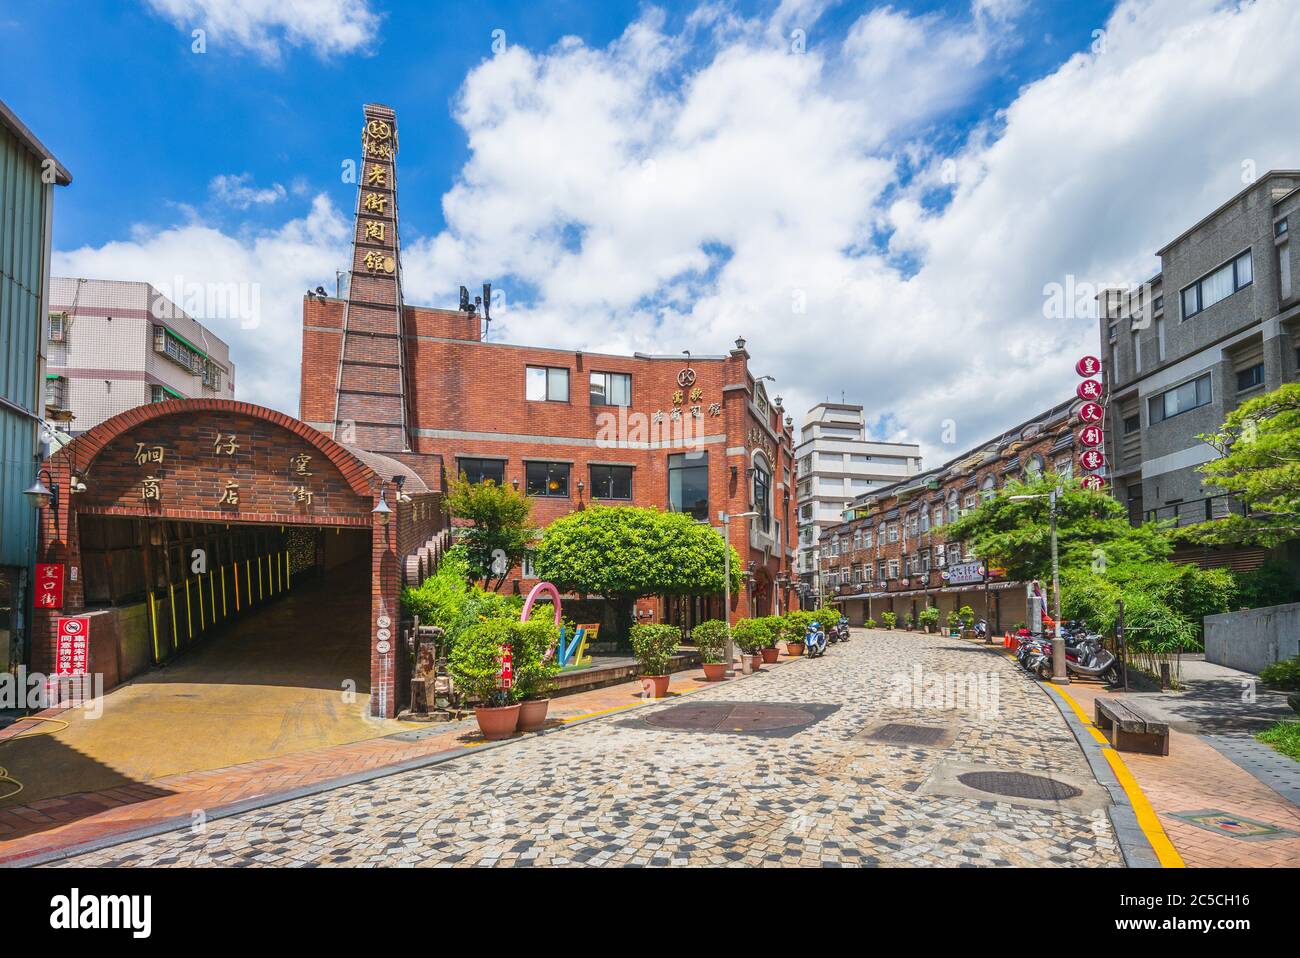 July 1, 2020: Yingge old street, aka the Pottery Street or Ceramics Street, located at Yingge town, New Taipei City, Taiwan, is famous for the history Stock Photo